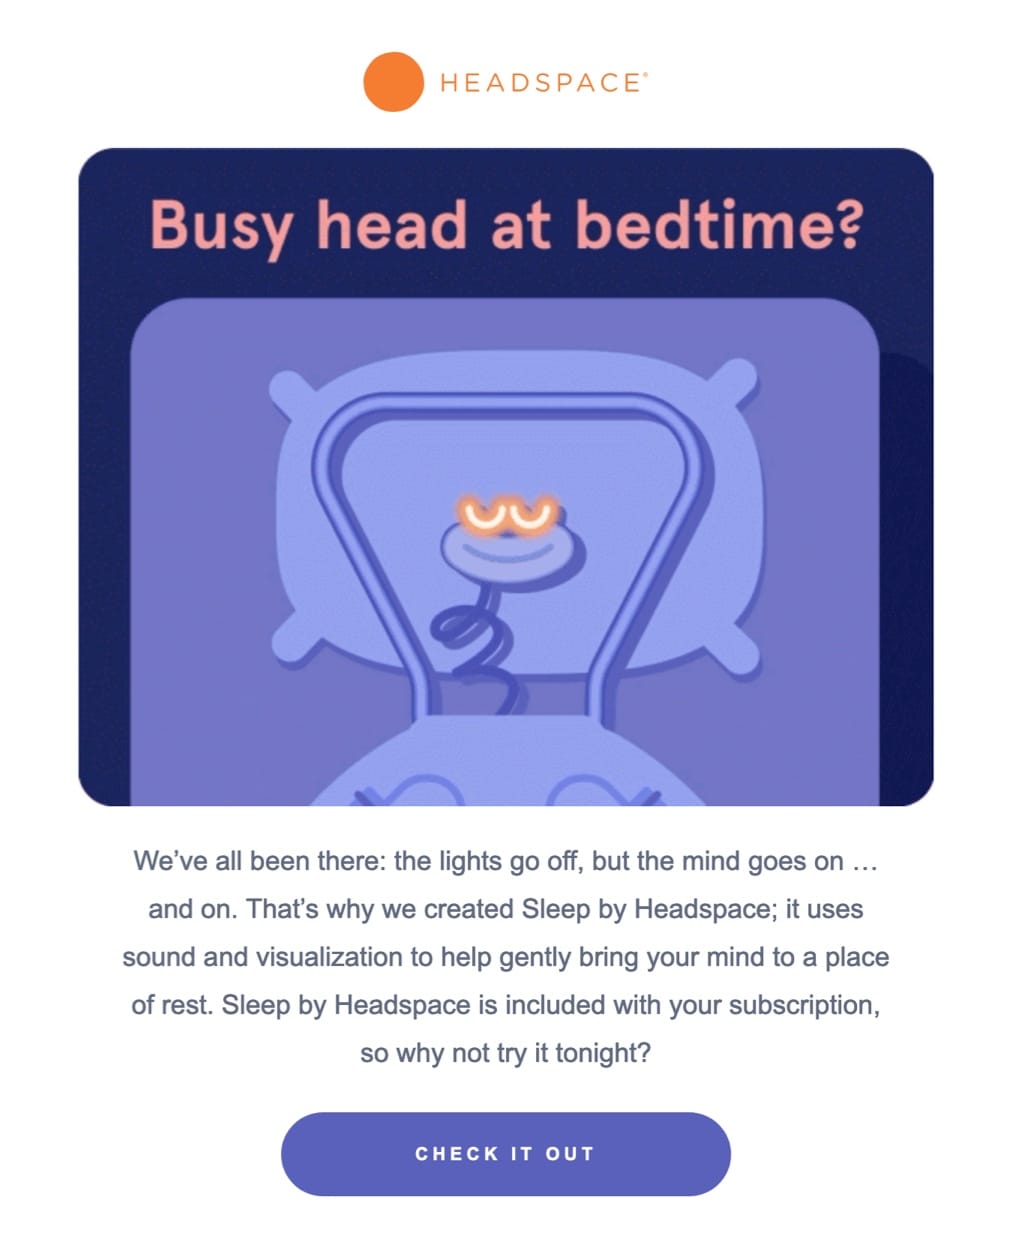 email-marketing-best-practices-headspace-sleep